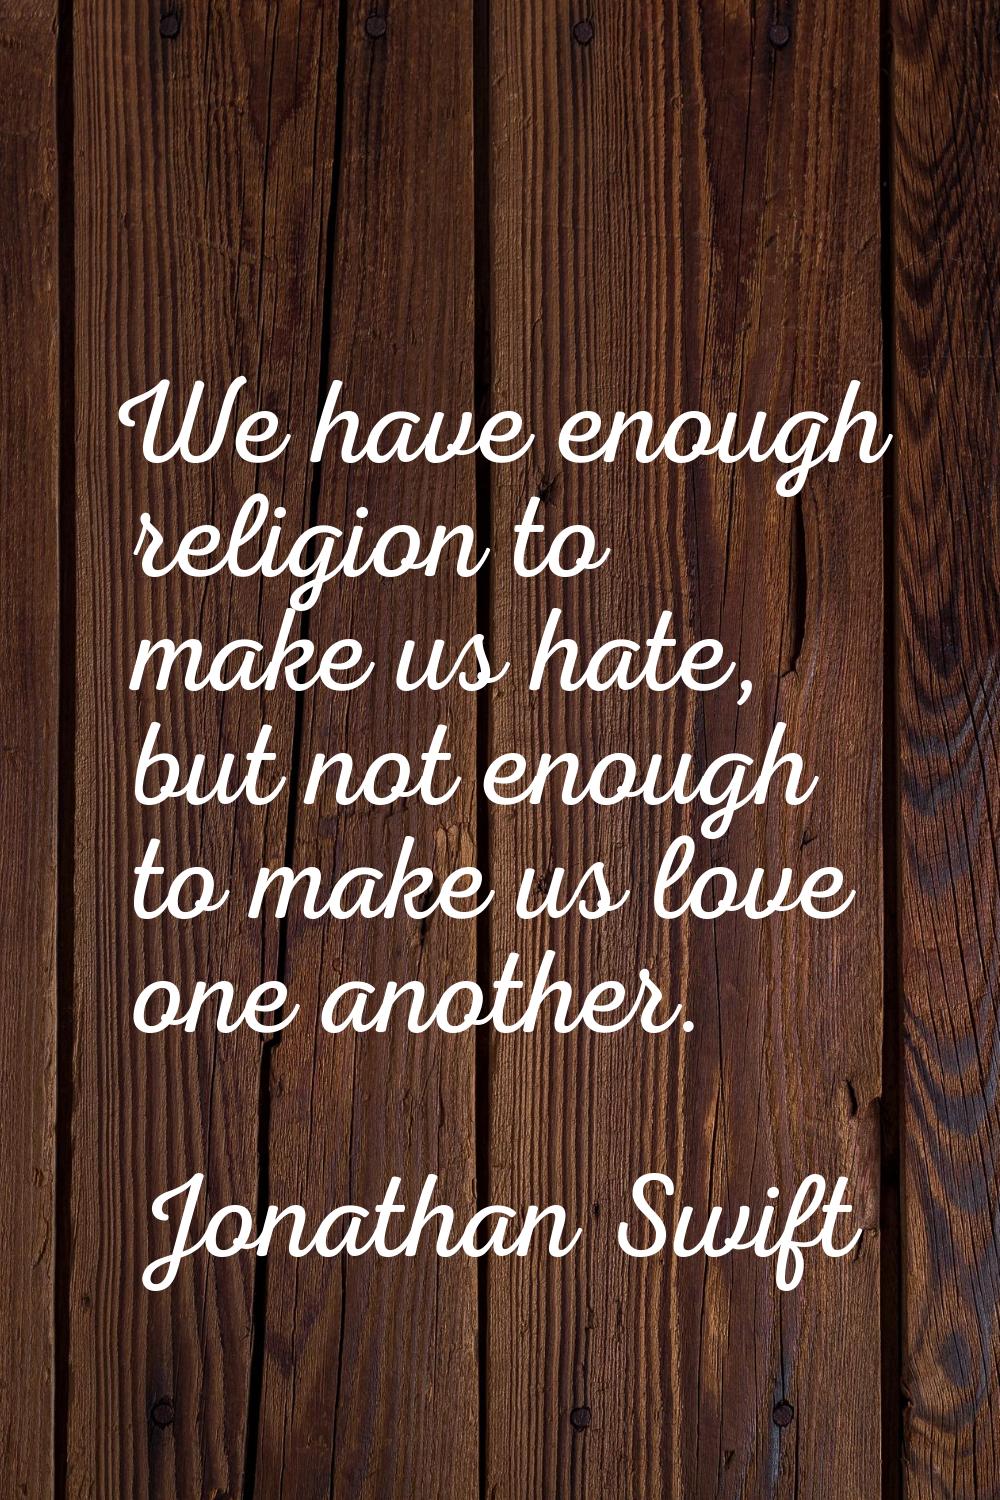 We have enough religion to make us hate, but not enough to make us love one another.